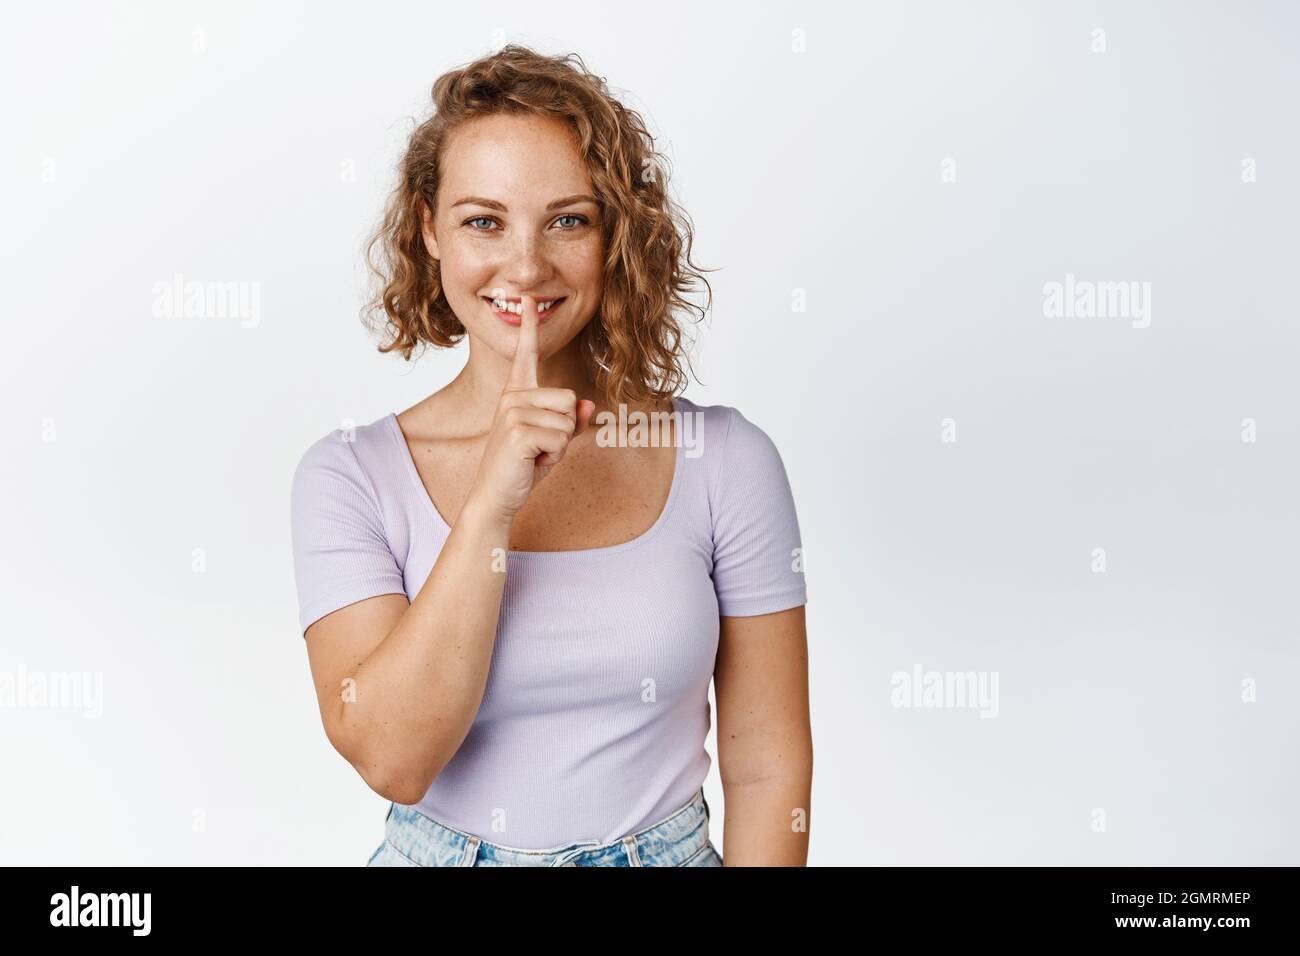 Smiling blond woman make hush sign, shushing with finger on her lips, be quiet gesture, standing in tshirt over white background Stock Photo